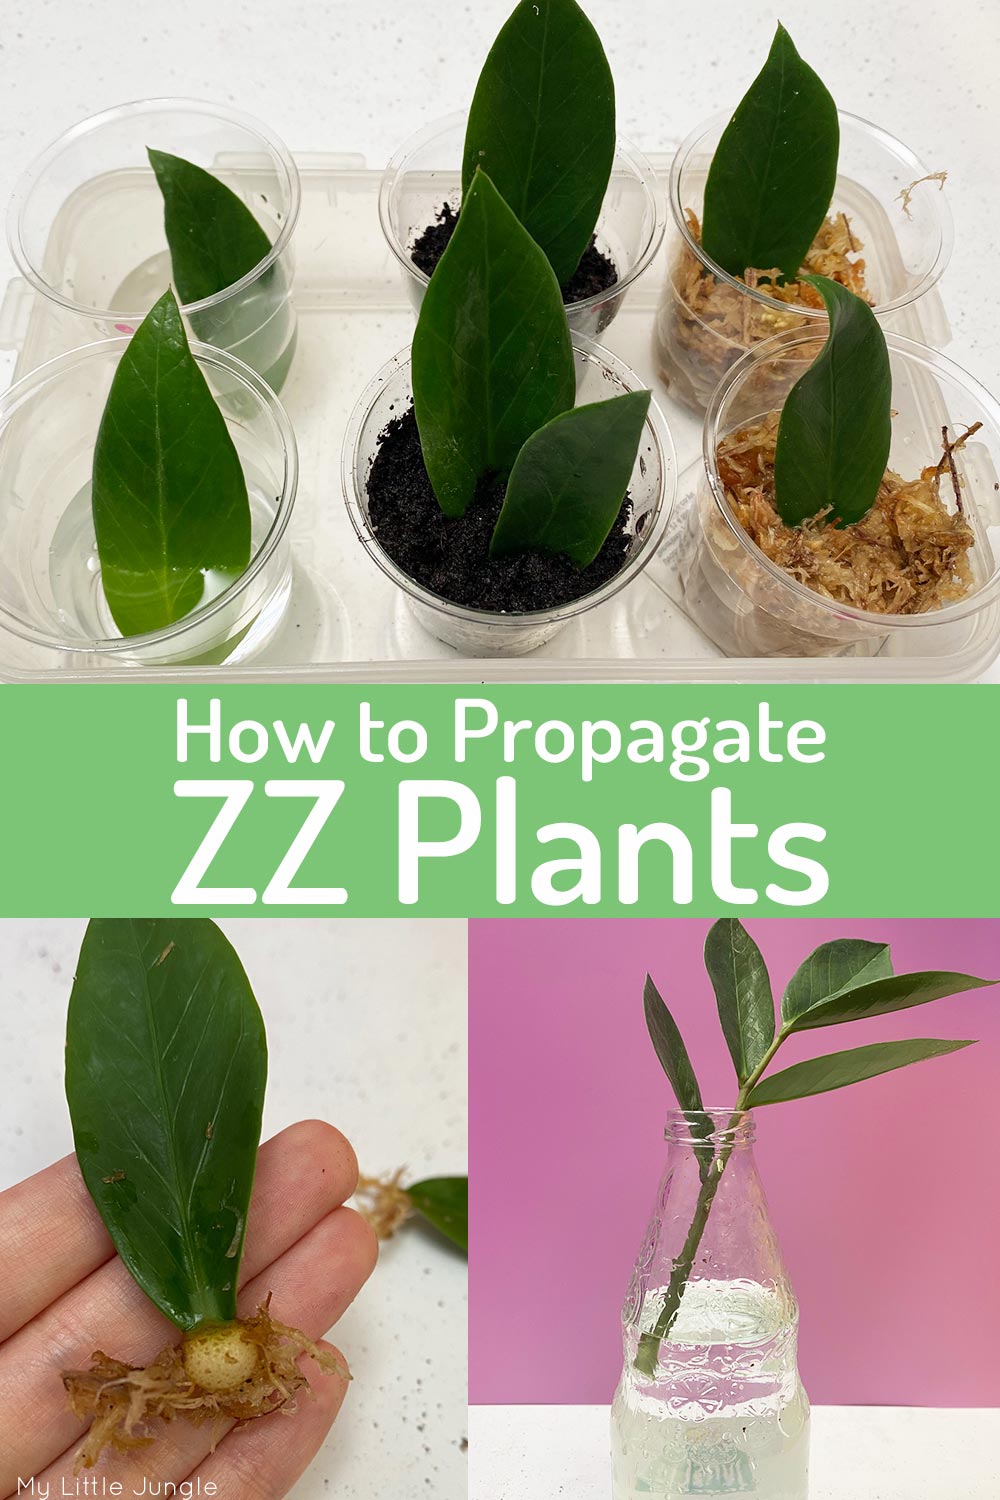 How to Propagate ZZ Plants - Different Methods